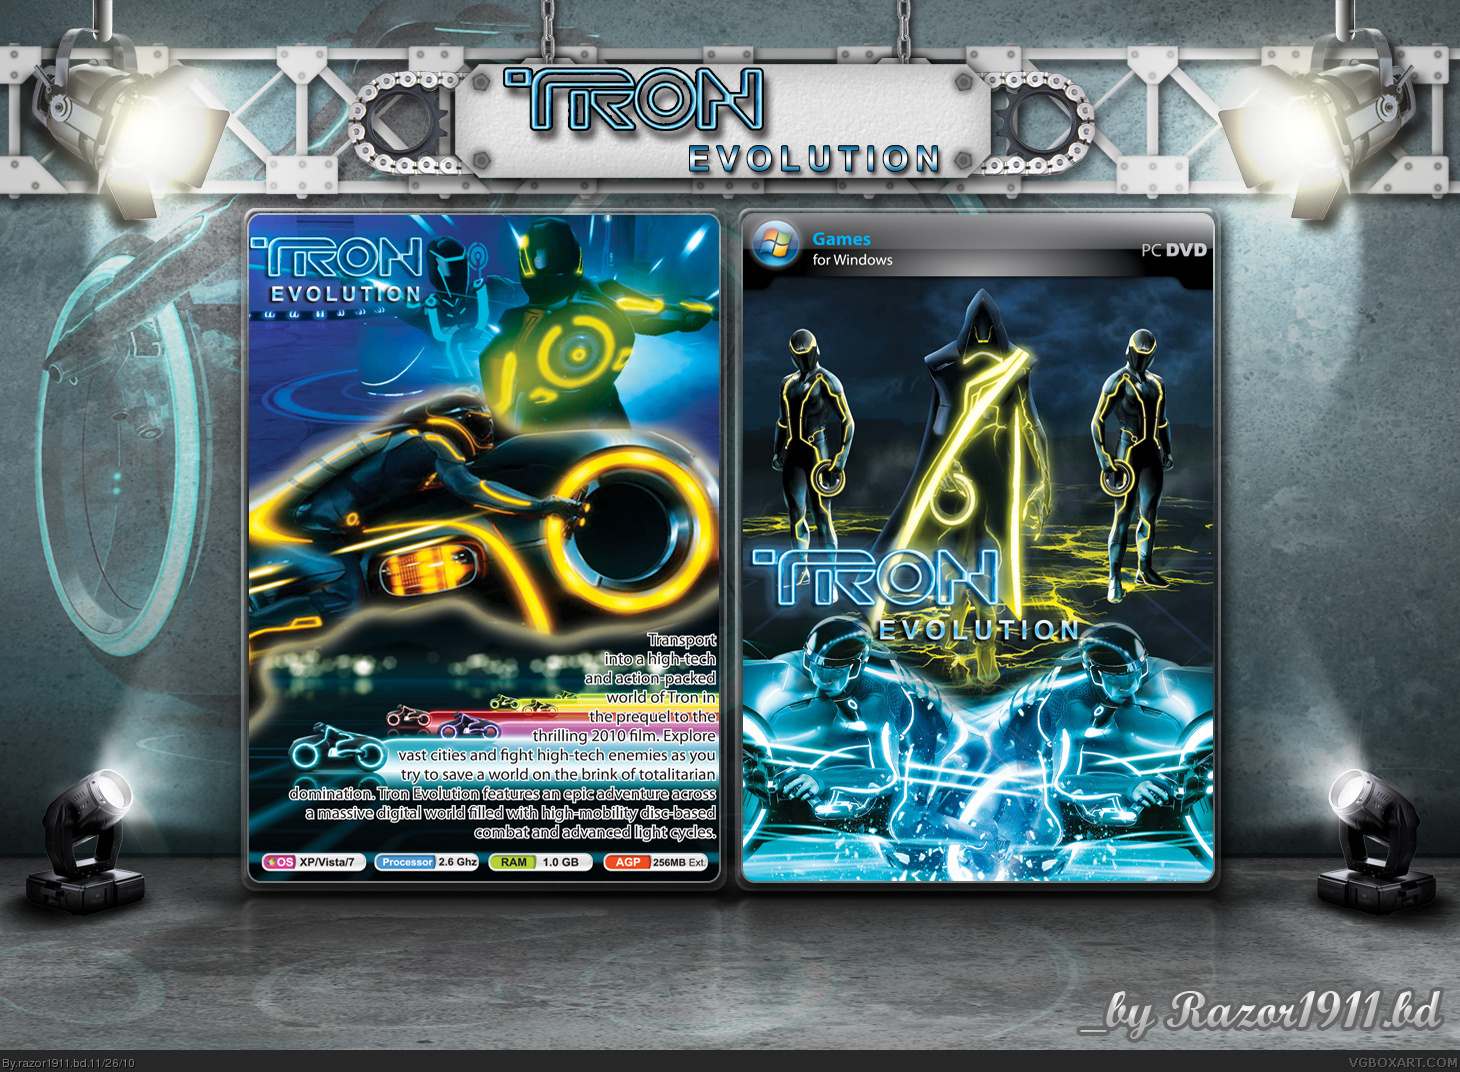 Tron Evolution The Video game box cover